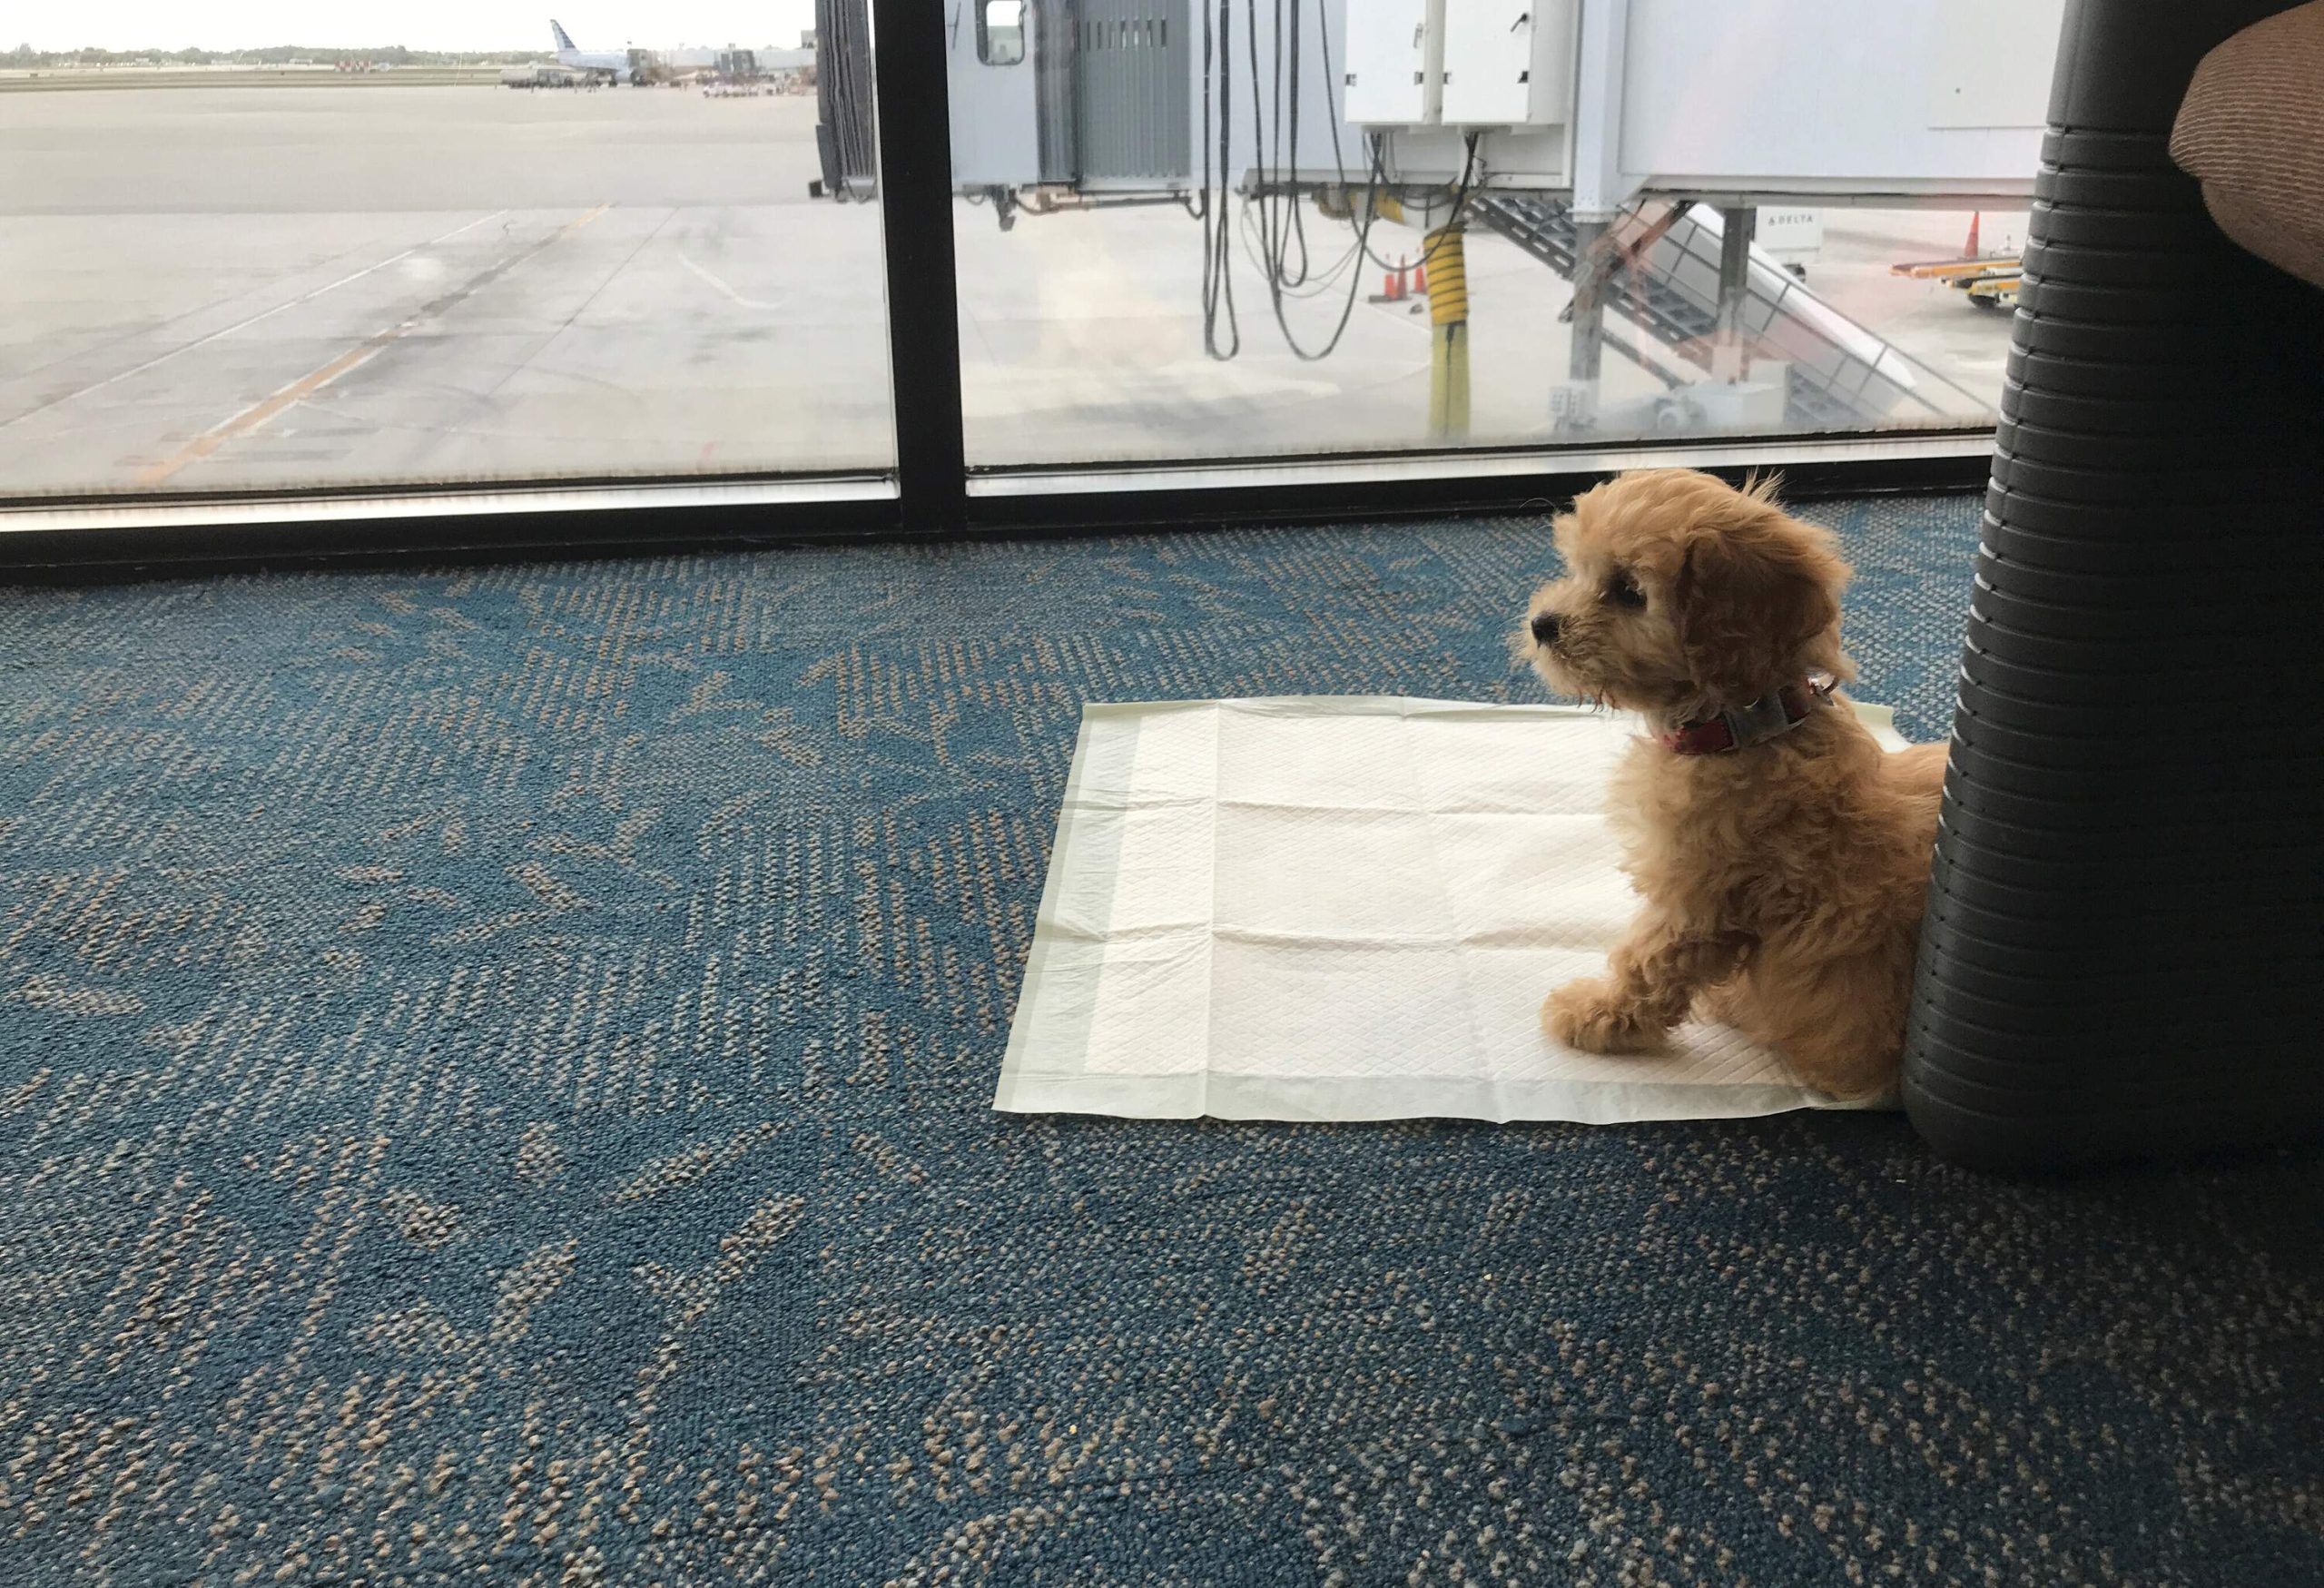 A brown dog sitting on a training pad in an airport terminal.